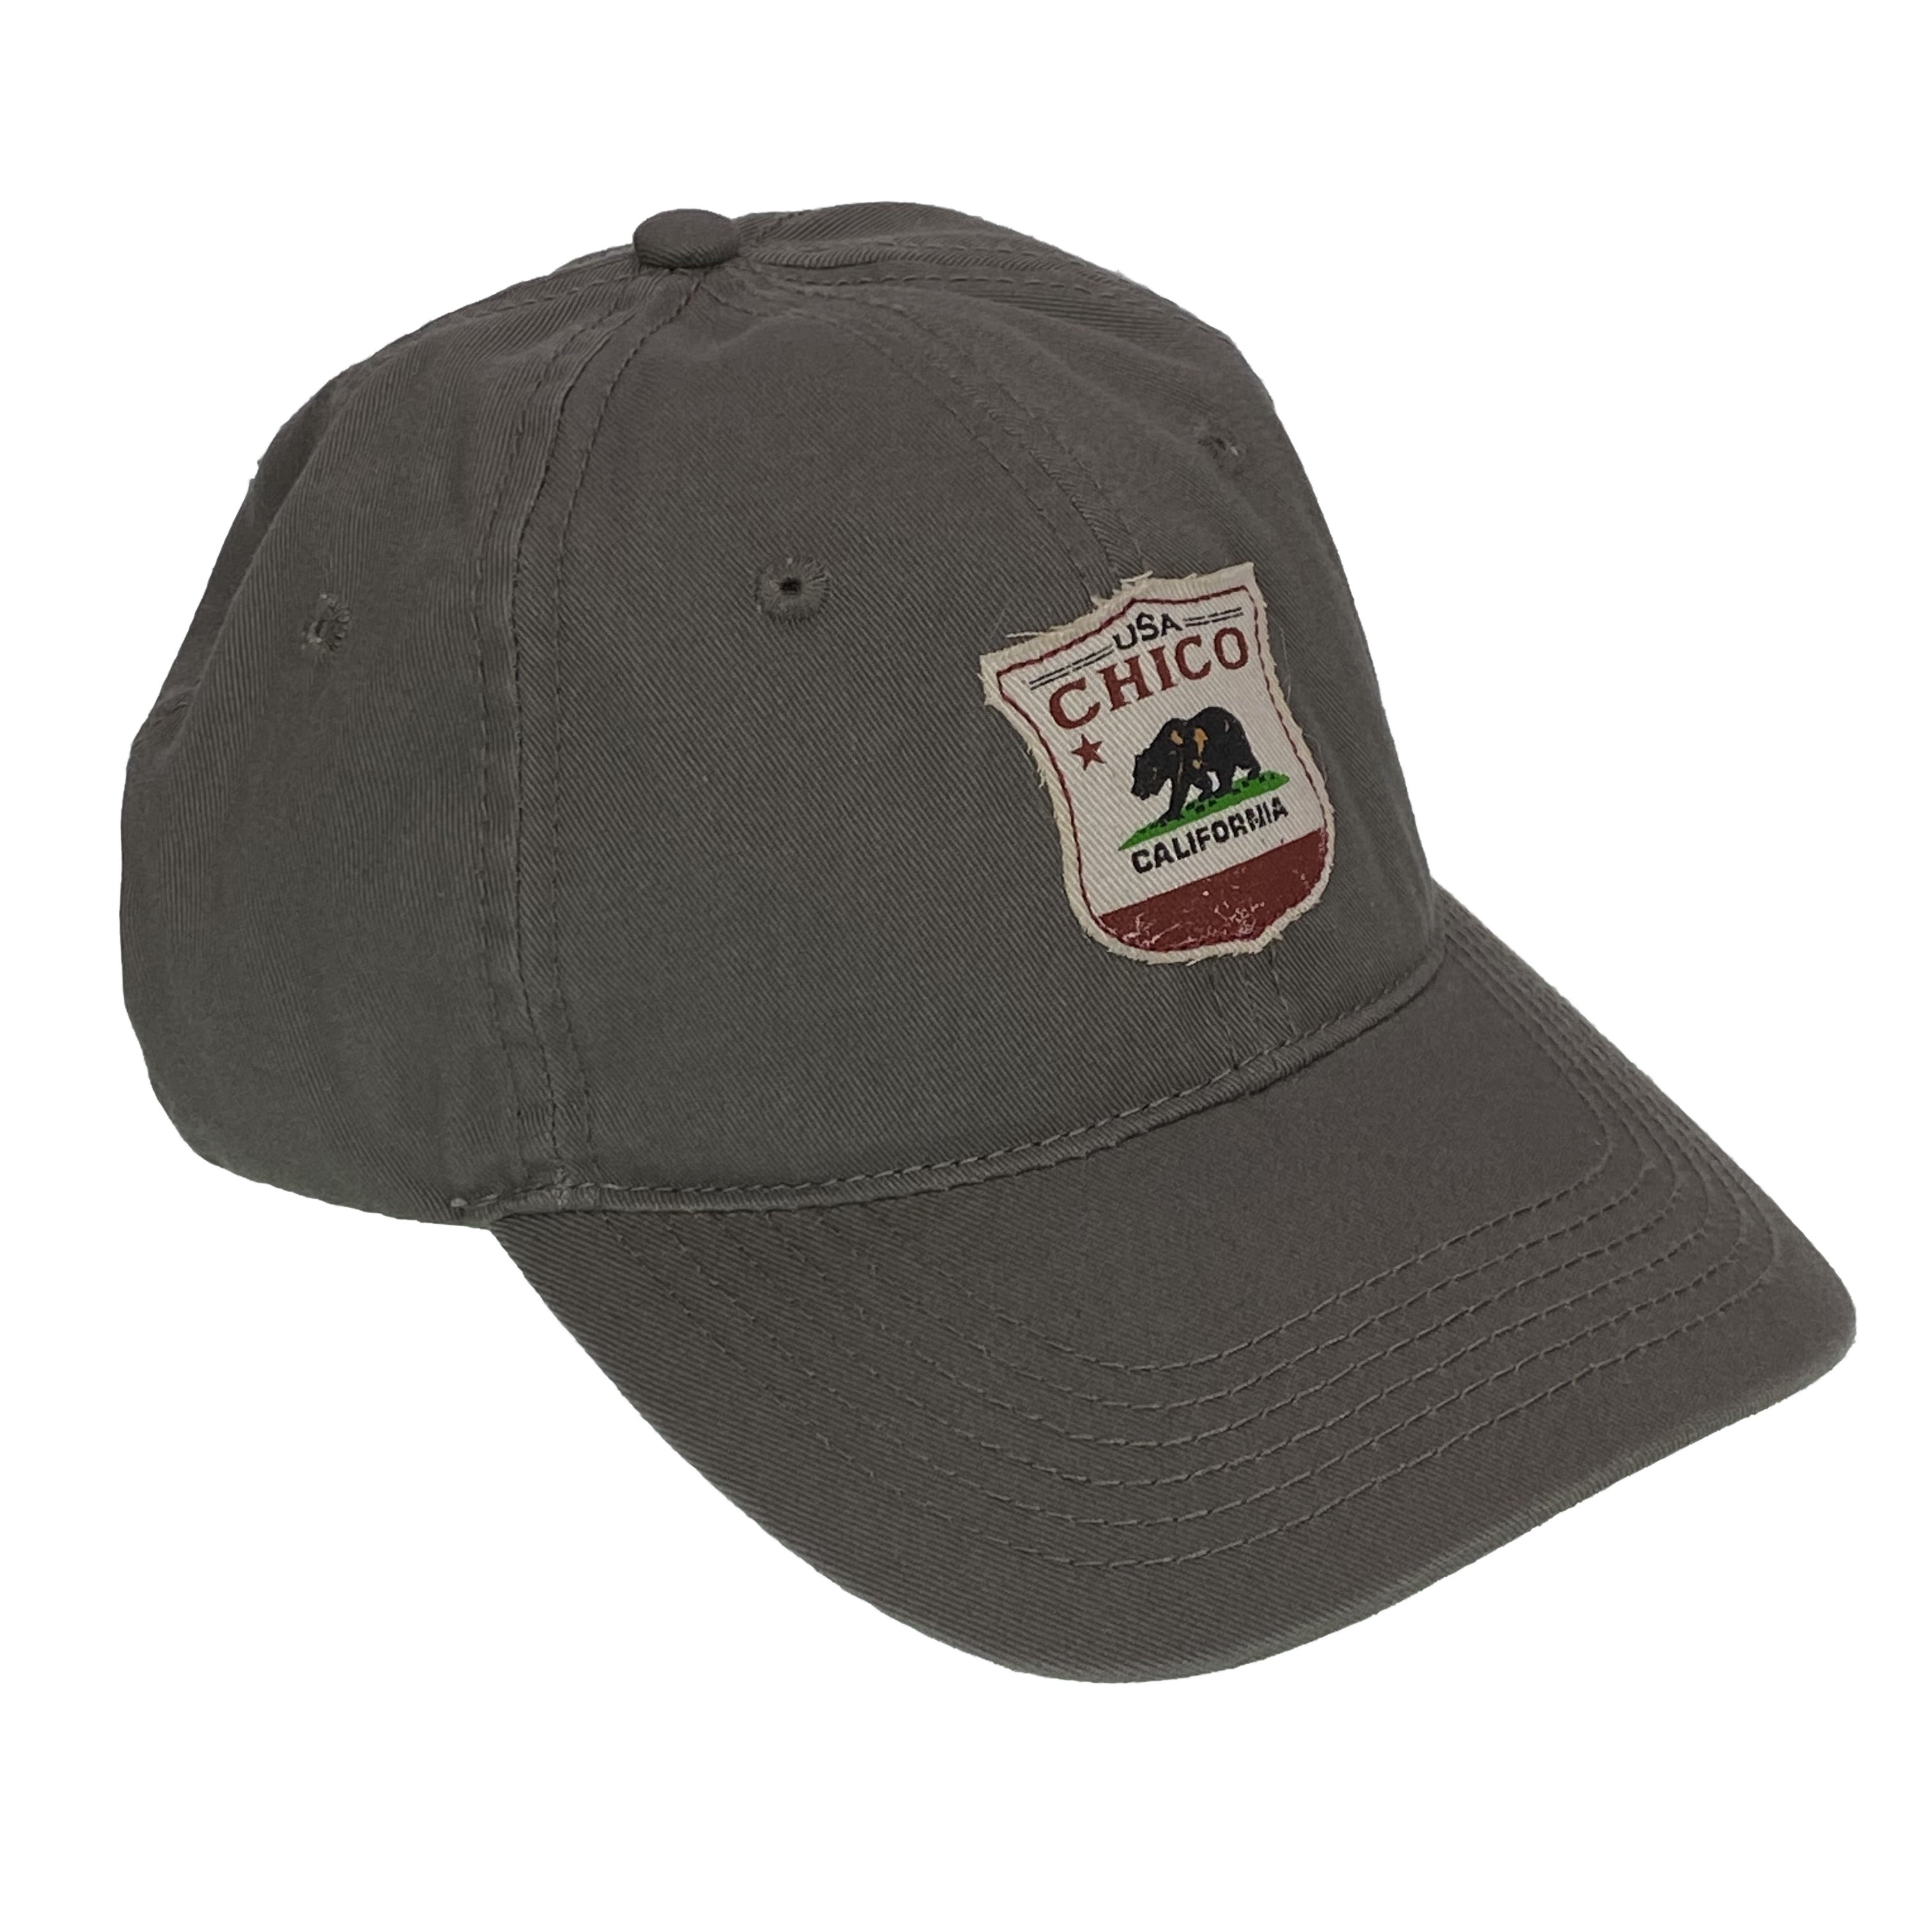 Chico Hat - Liberty Bell LIGHT OLIVE   3259307.2